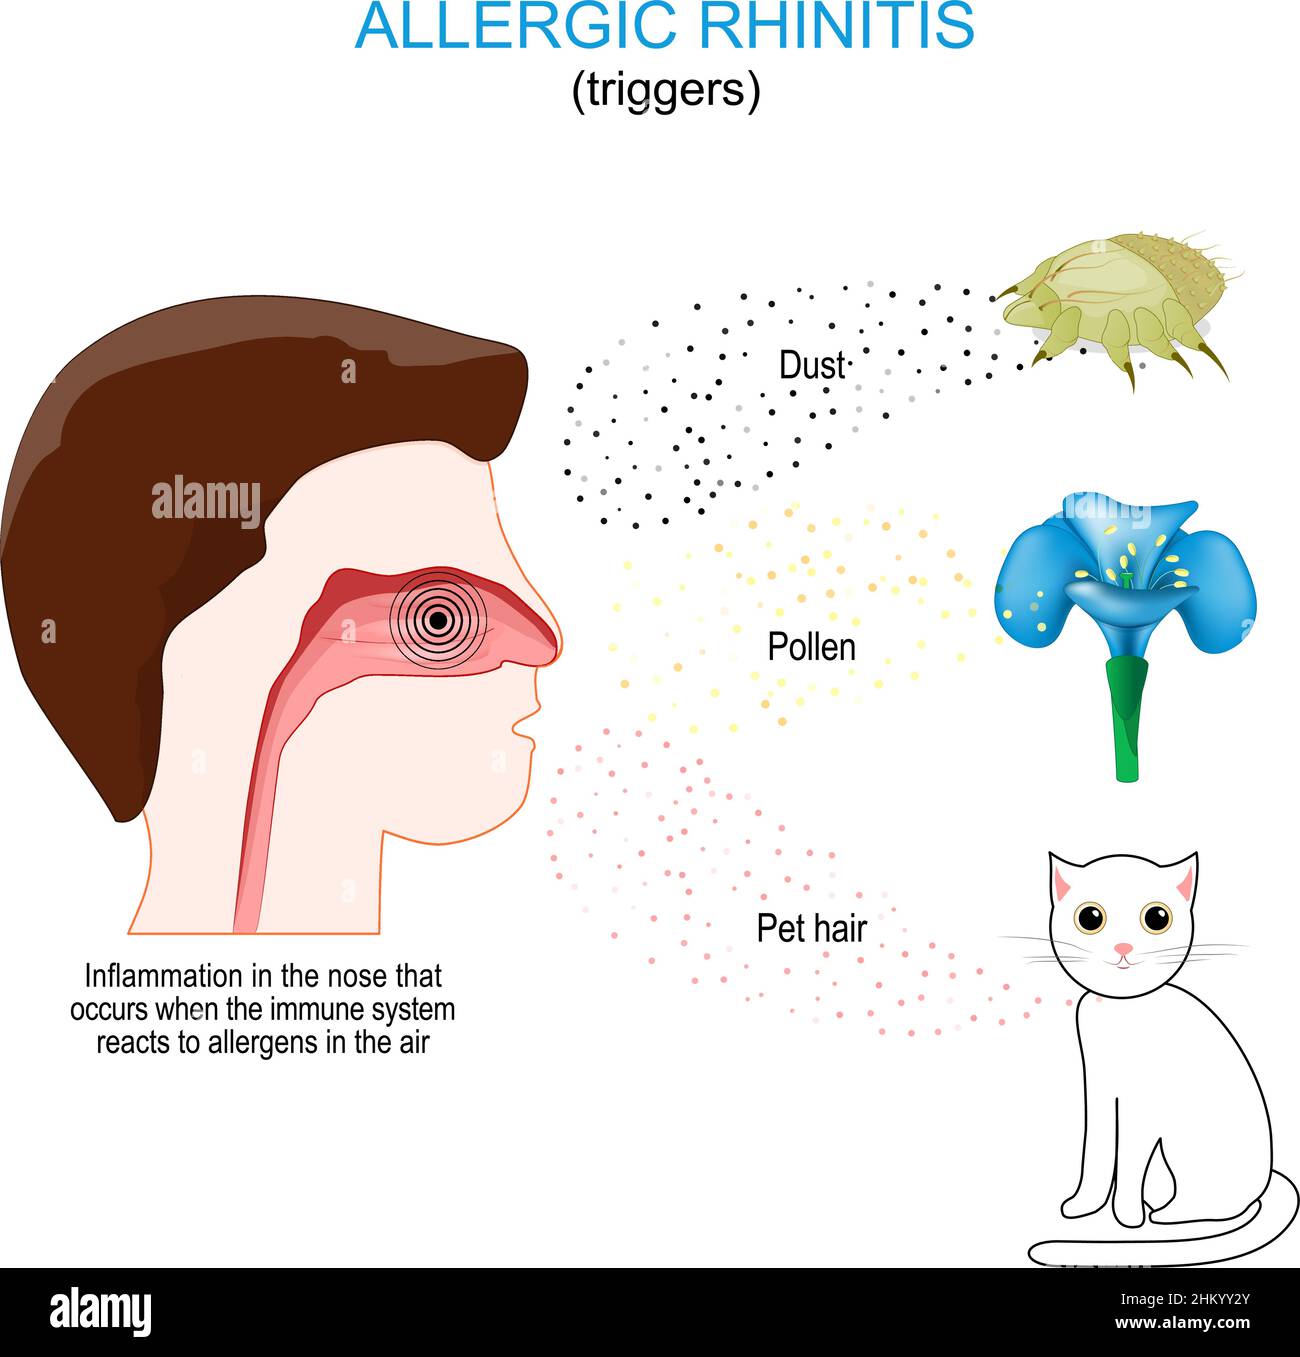 Allergic rhinitis. Inflammation in the nose that occurs when the immune system reacts to allergens in the air. triggers: dust, pollen, and pet hair Stock Vector